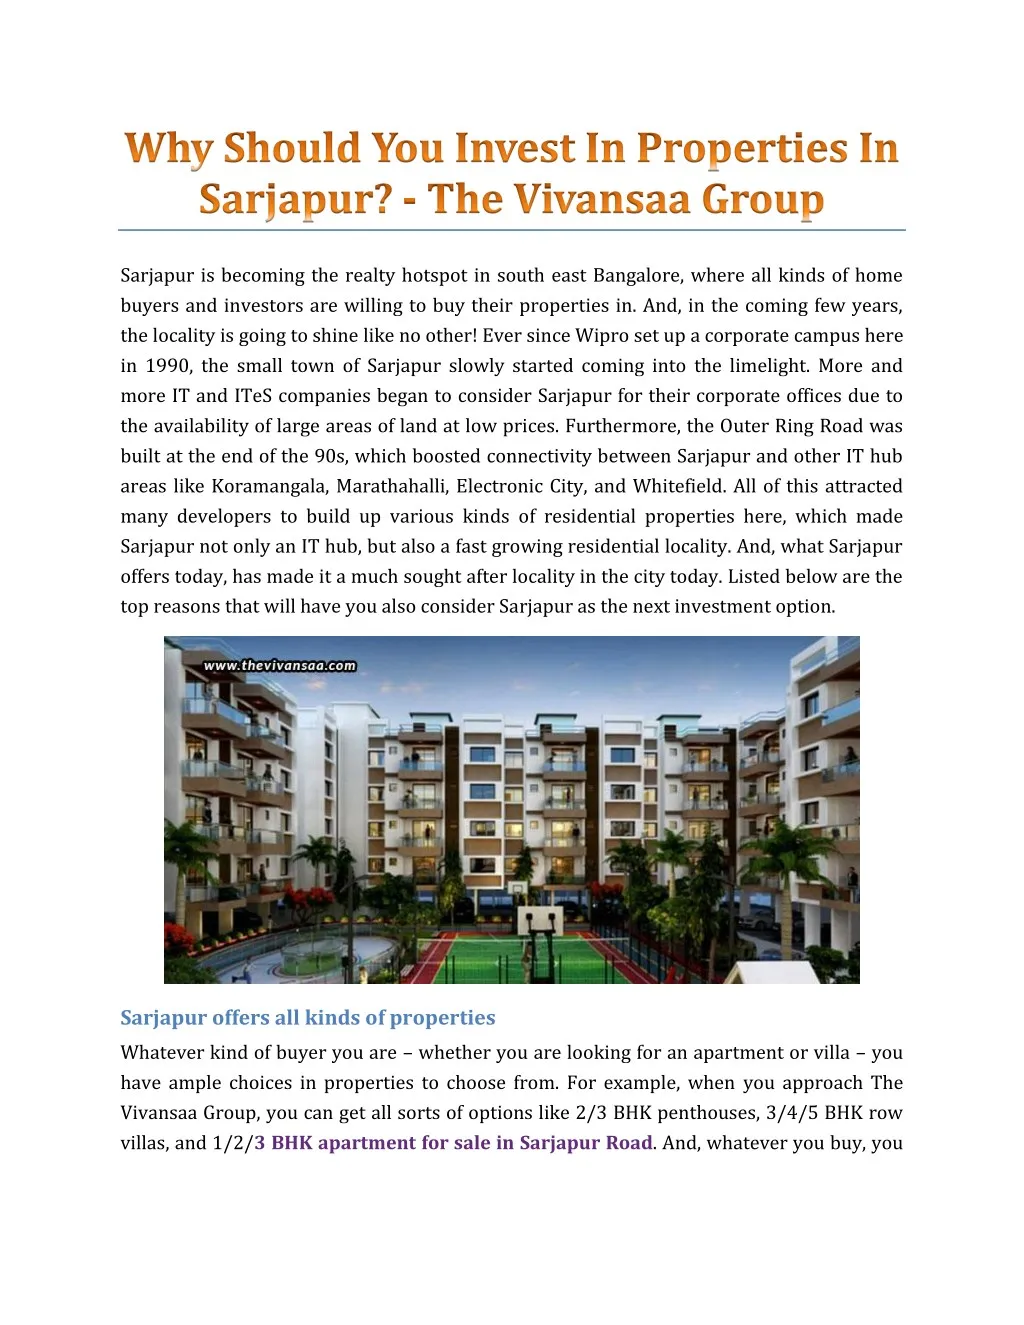 sarjapur is becoming the realty hotspot in south